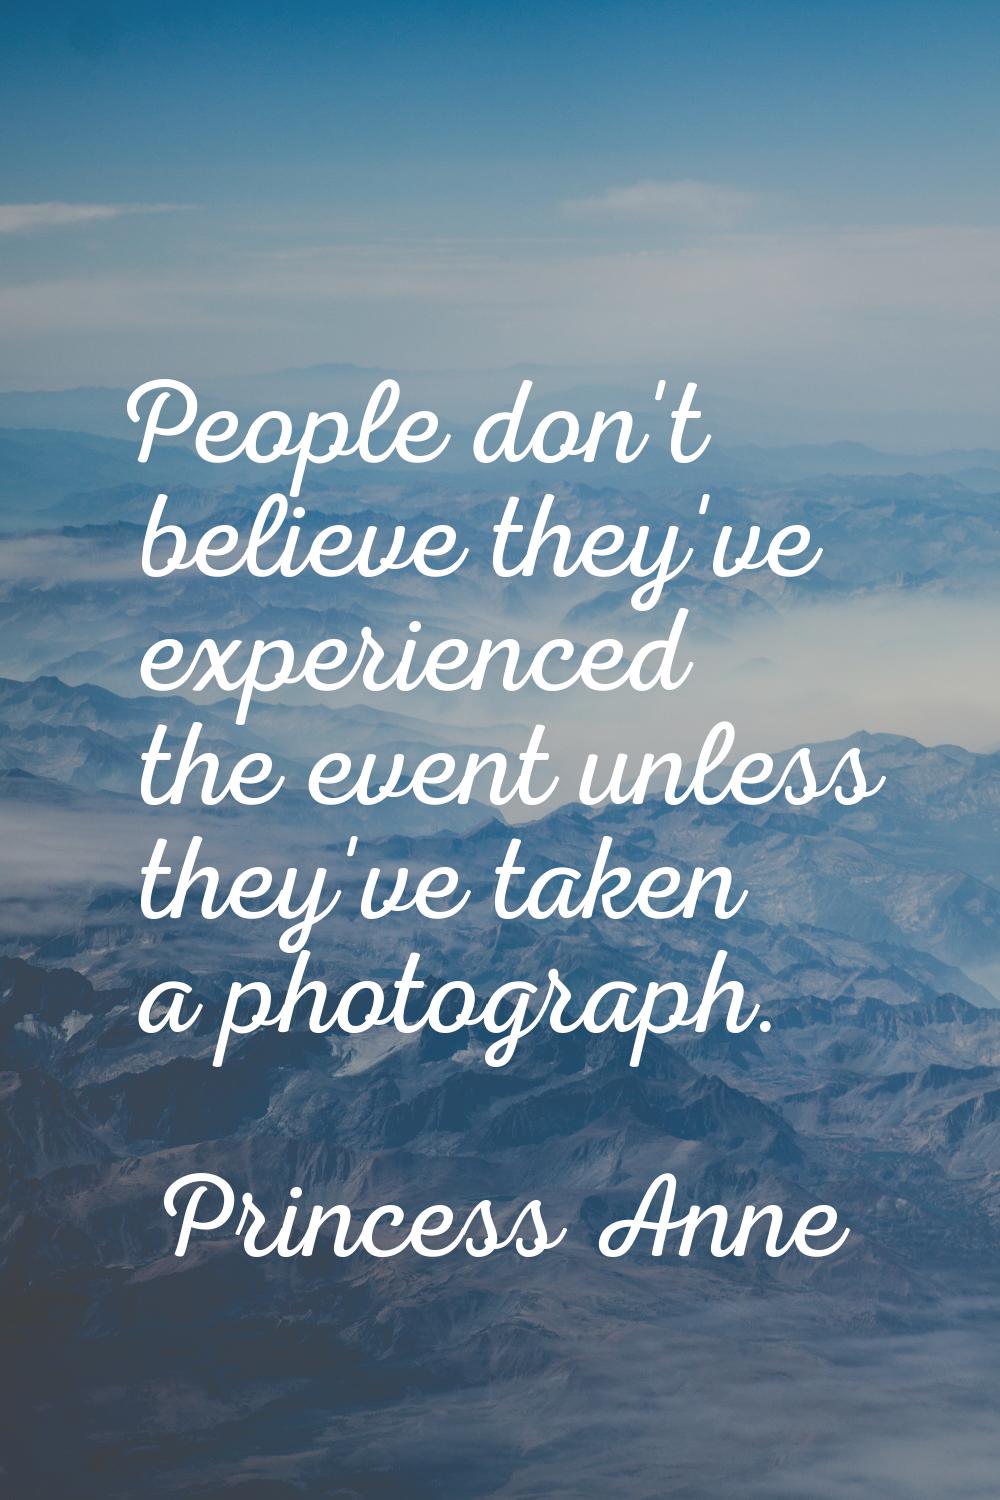 People don't believe they've experienced the event unless they've taken a photograph.